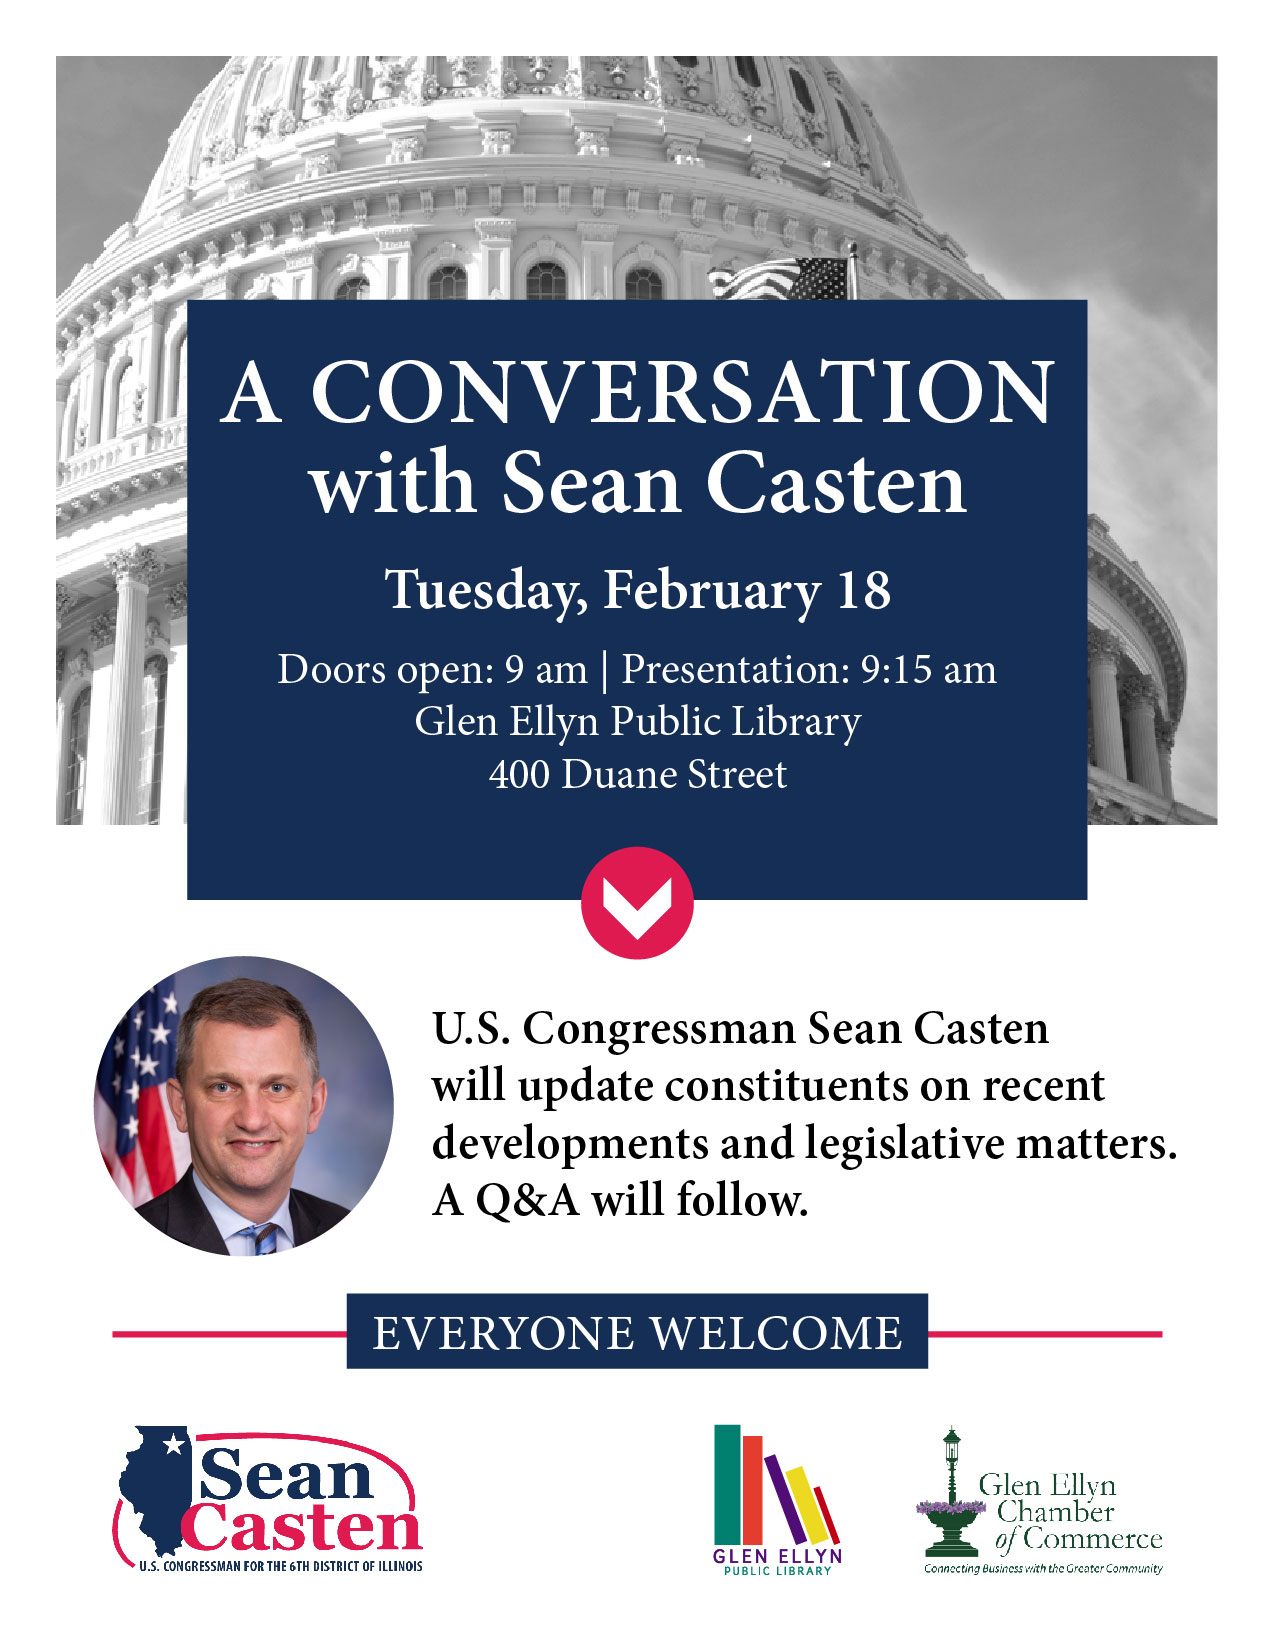 Information flyer for town hall event with Sean Casten